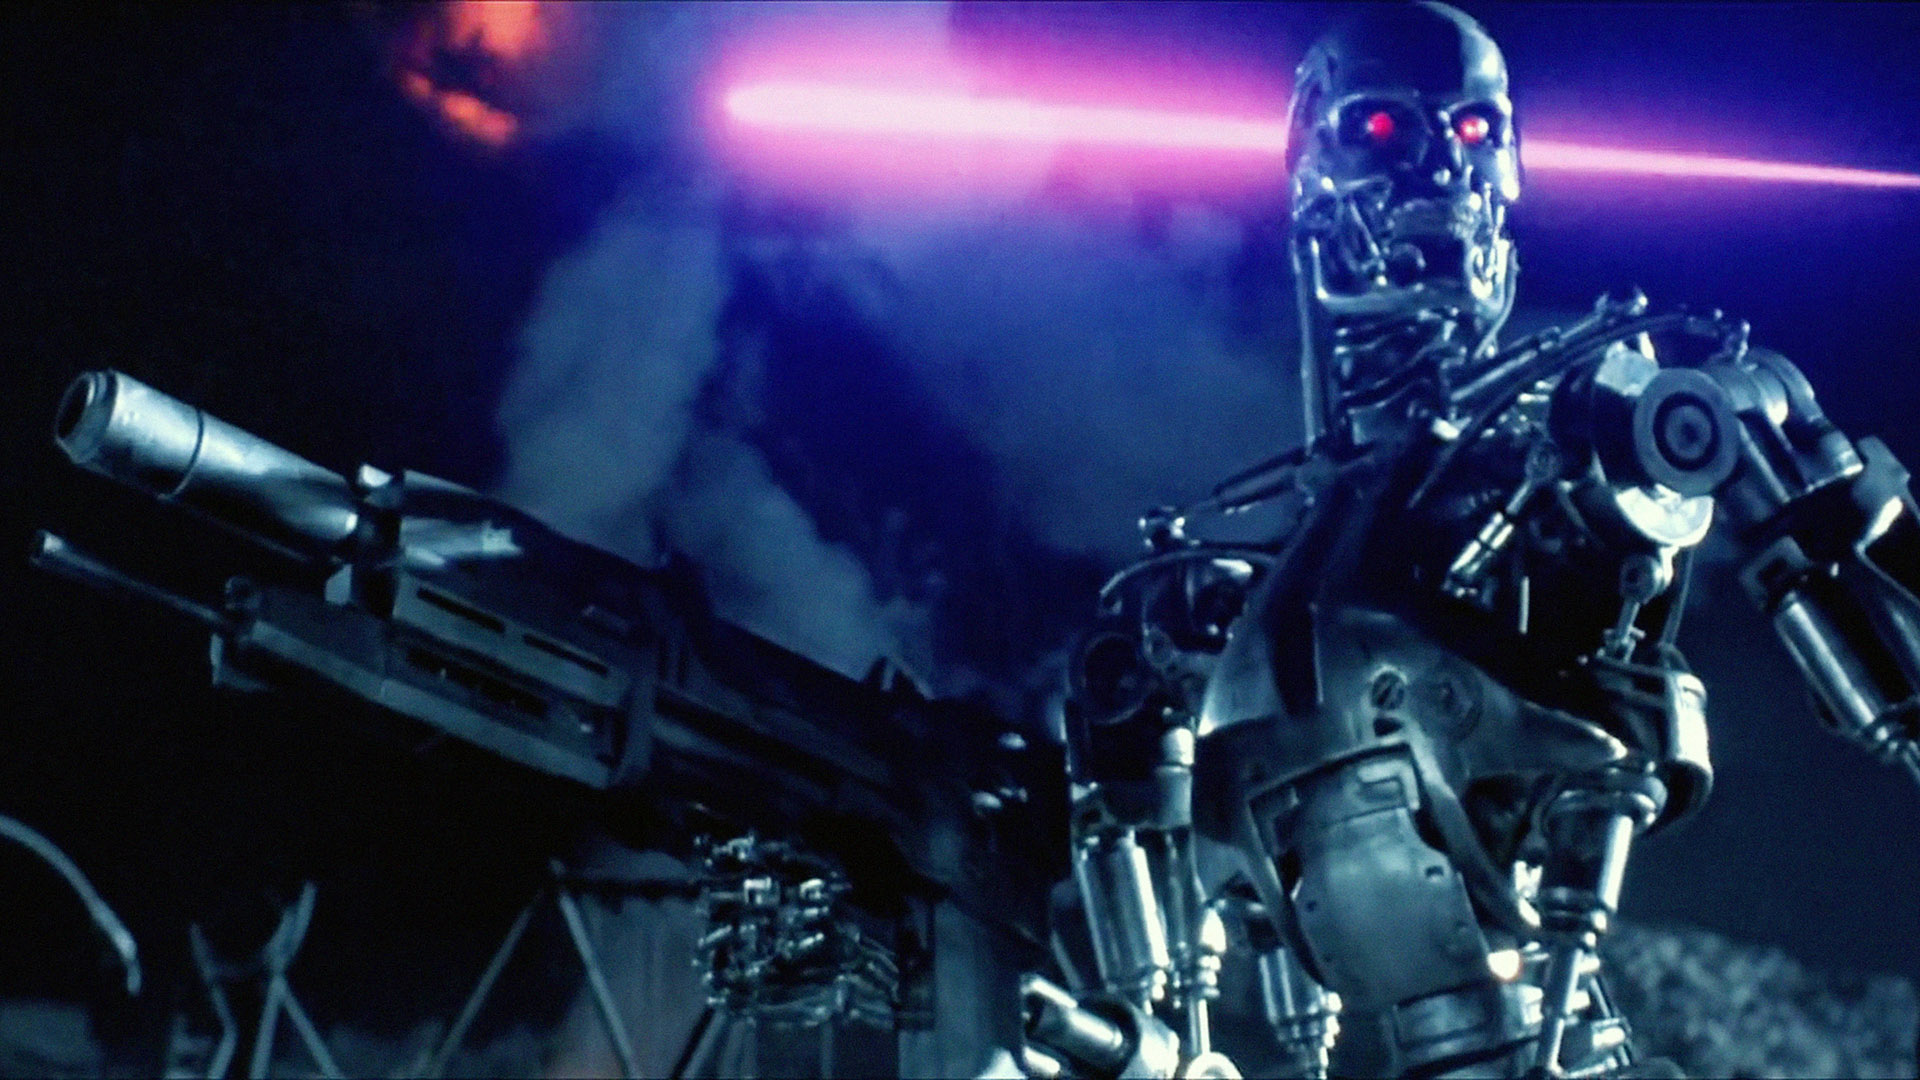 7 Sequels That Are Better Than the Original (No, Terminator 2 Isn't On the List)